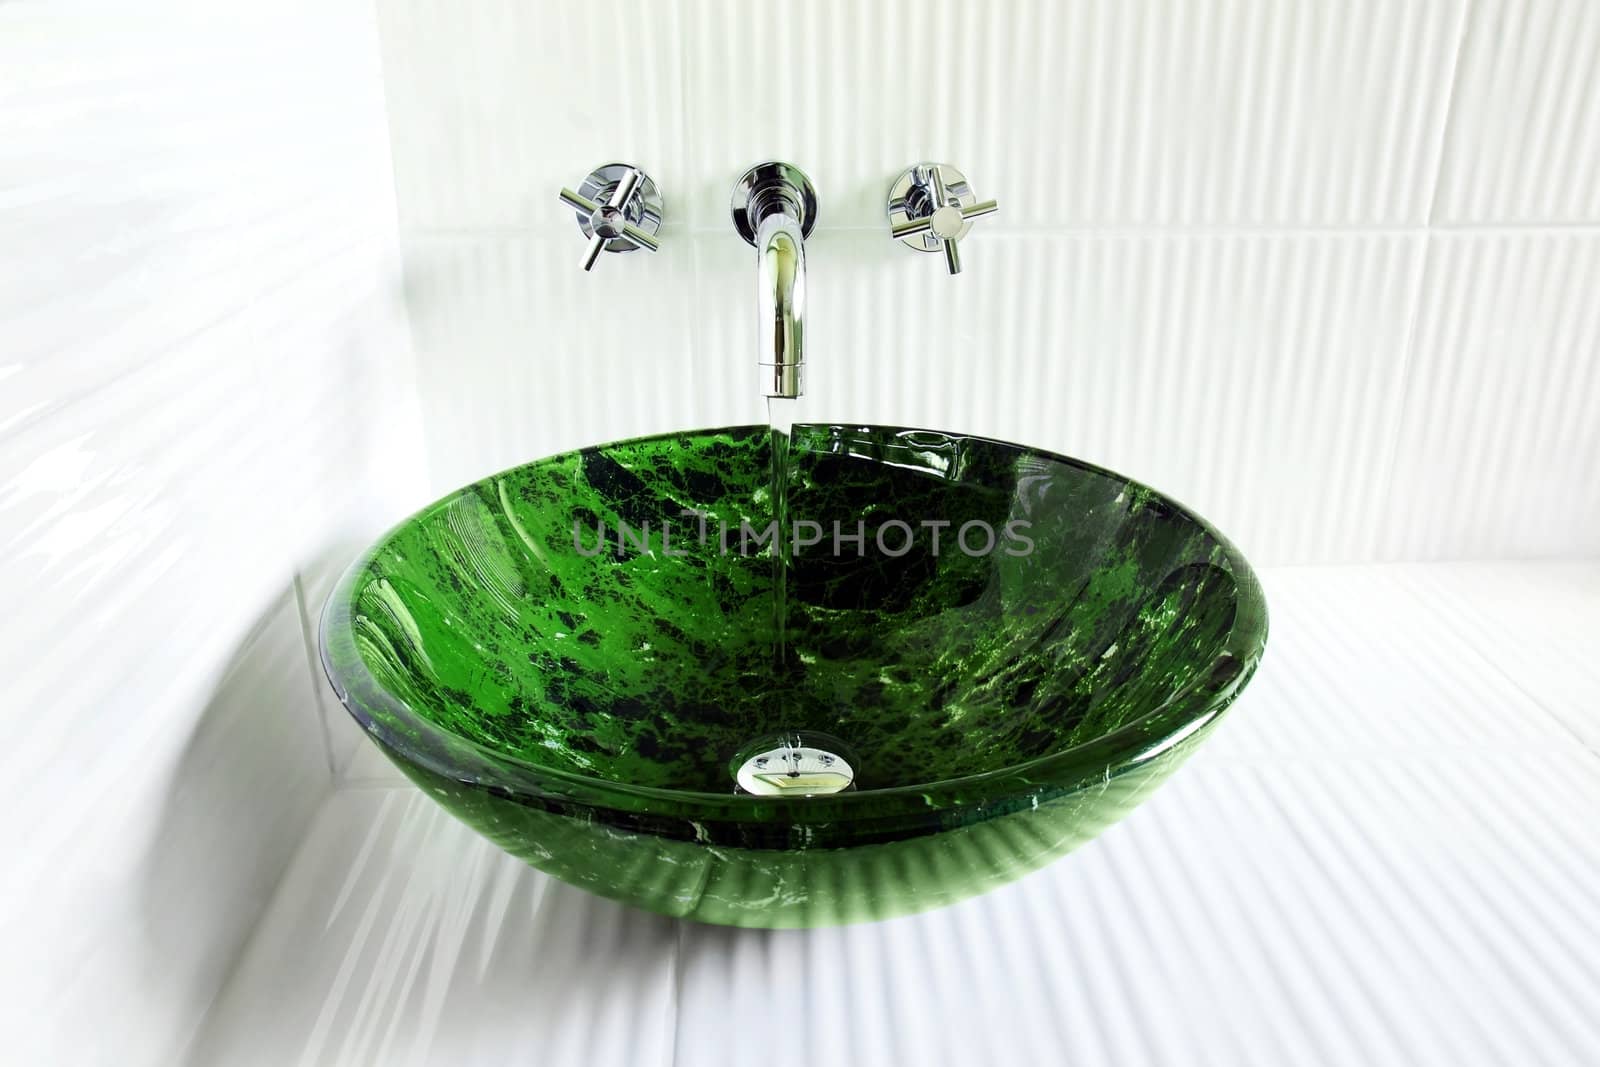 Design sink with running water by Mirage3